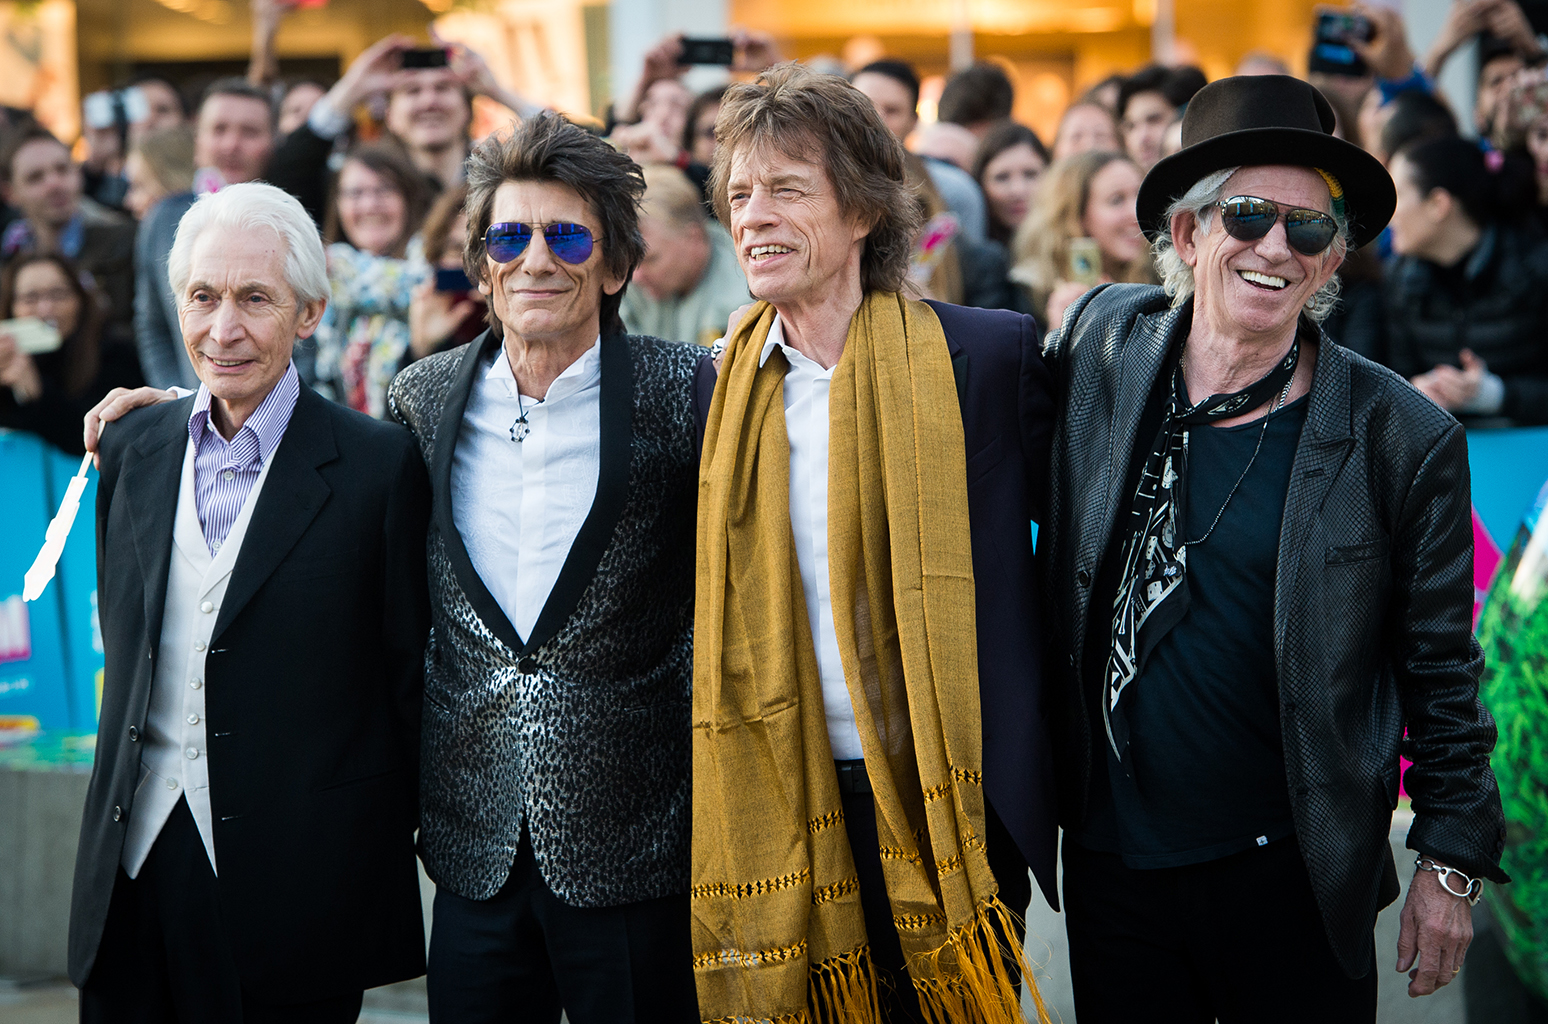 High Resolution Wallpaper | The Rolling Stones 1548x1024 px